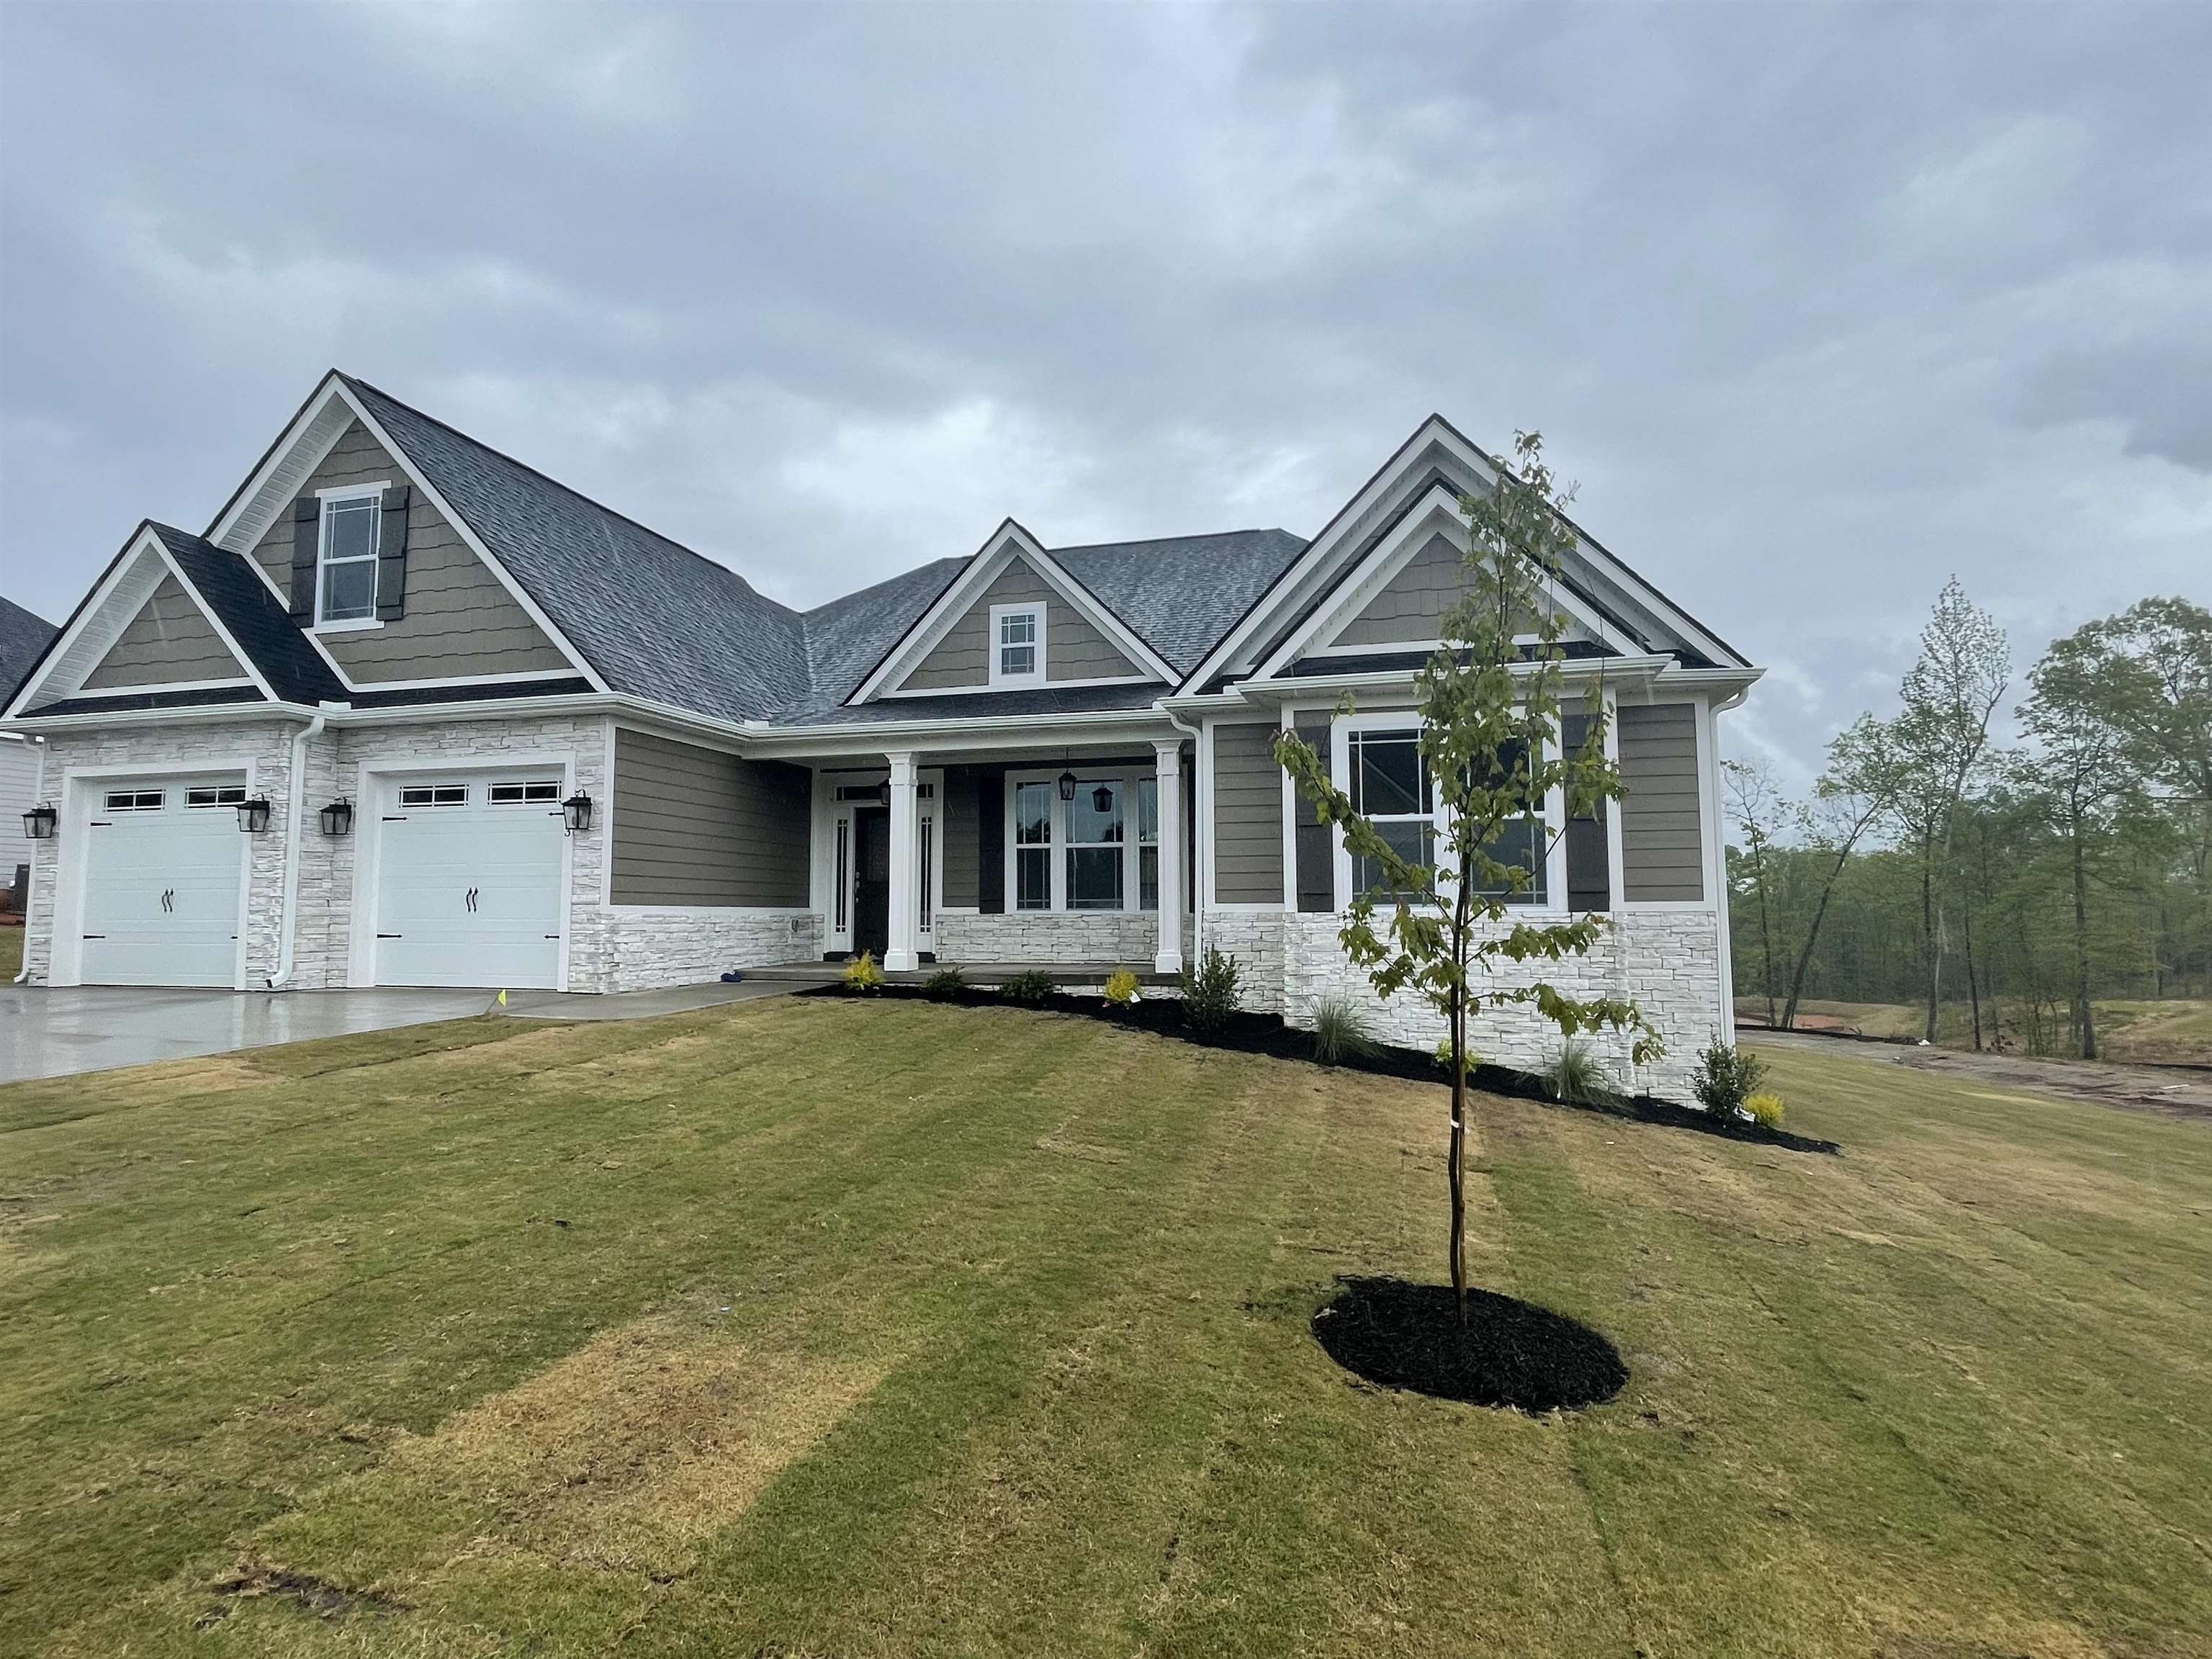 Brand new home and one of this builder's largest floor plans. Nestled in desirable Travelers Rest! Located on a cul-de-sac. Quality built, this luxury community features large lots, peek mountain and wooded views! Just 2 miles to downtown Travelers Rest and an easy drive to downtown Greenville. The Mayfair Elite is an open concept home featuring 4 bedrooms, 3 full bathrooms, office/study, large walk-in pantry, and large kitchen with extended cabinets & island.  Granite counters + breakfast nook. This floorplan includes two covered decks plus an expansive rear deck for entertaining.  Standard features in this home and in the community include concrete plank and stone exterior, architectural shingles, soffit exterior lighting, nine to 12 foot ceilings, crown molding with rope lighting in the master, living and dining rooms, large tiled double-headed shower in primary bathroom, separate tub, dual sinks, electric water heater, and more! Make one of many homes available in this community yours!